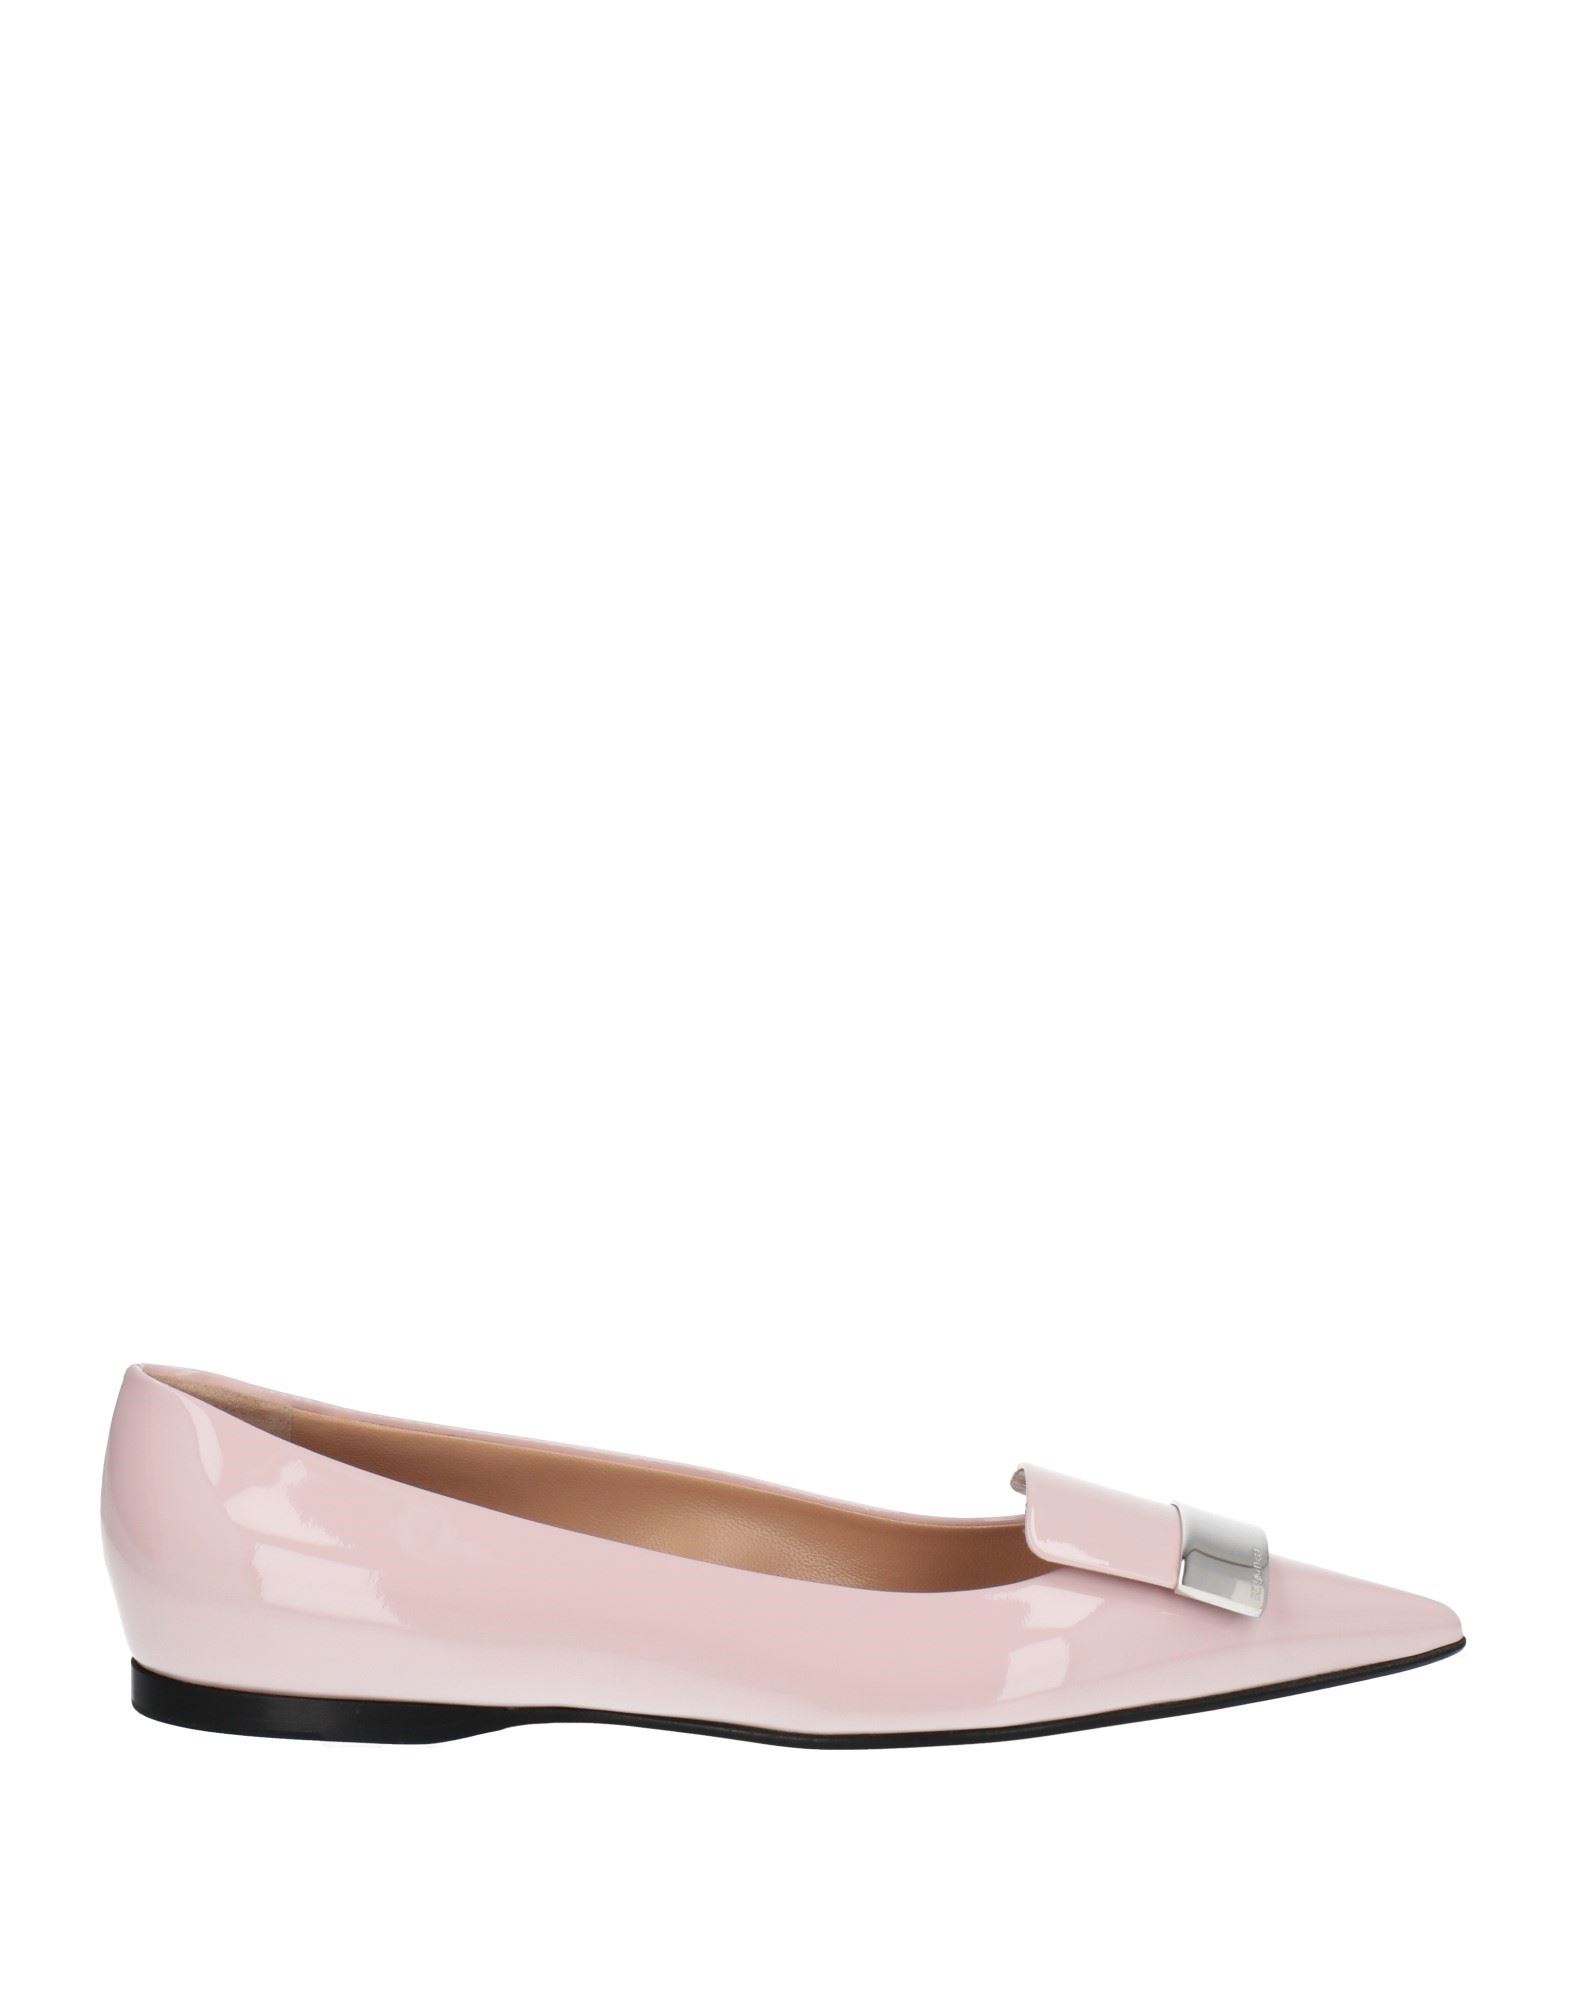 Sergio Rossi Ballet Flats In Pink